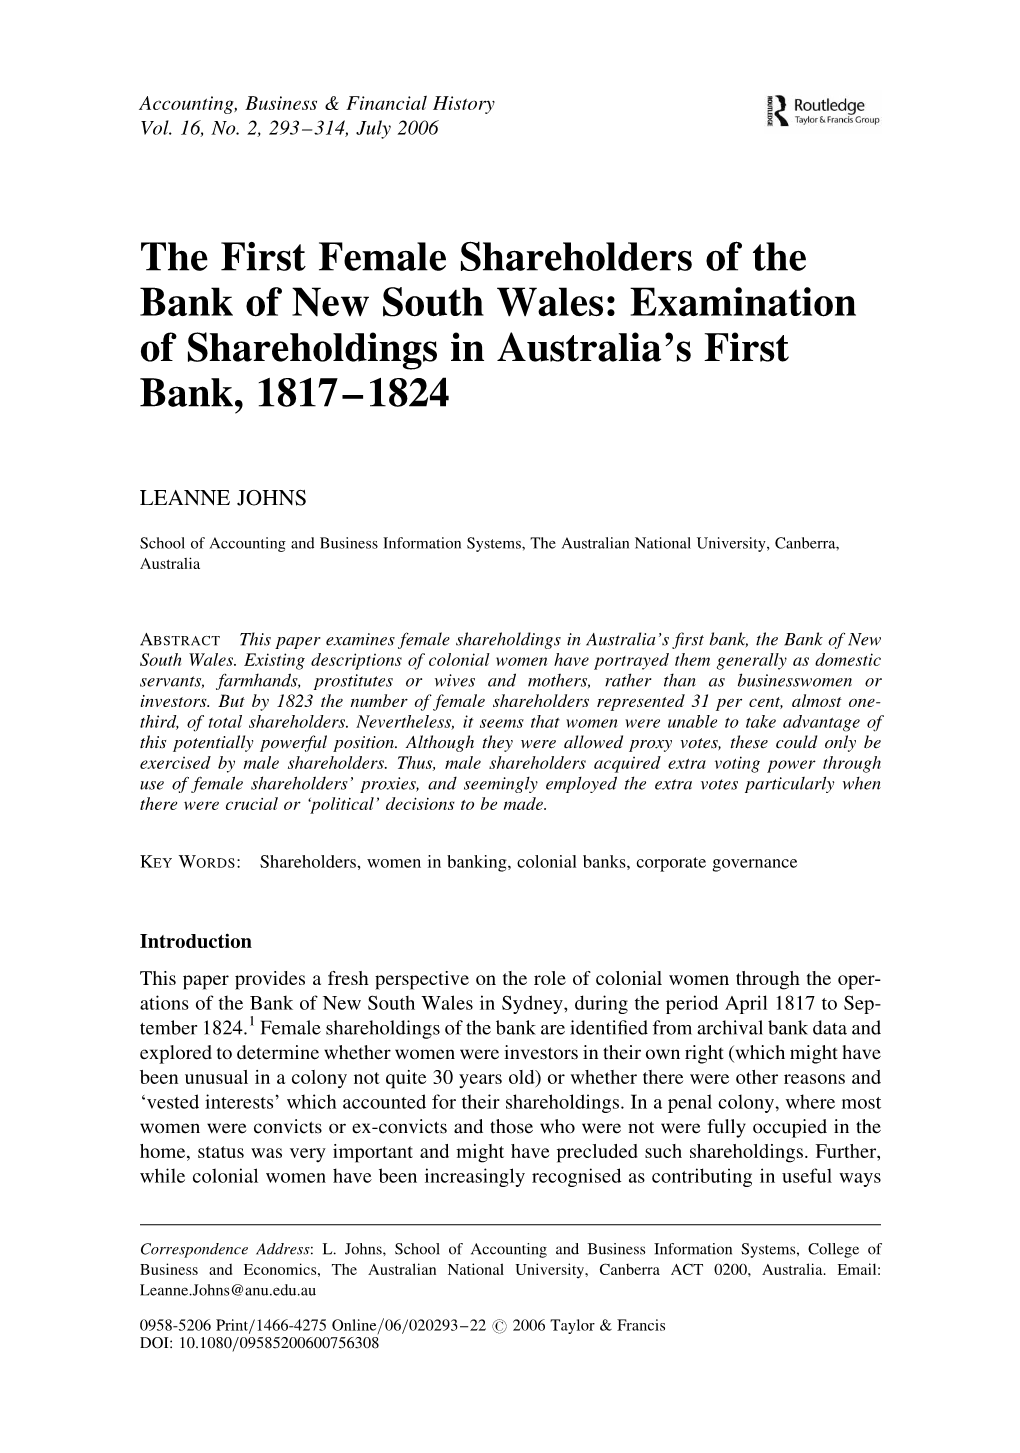 The First Female Shareholders of the Bank of New South Wales: Examination of Shareholdings in Australia’S First Bank, 1817–1824